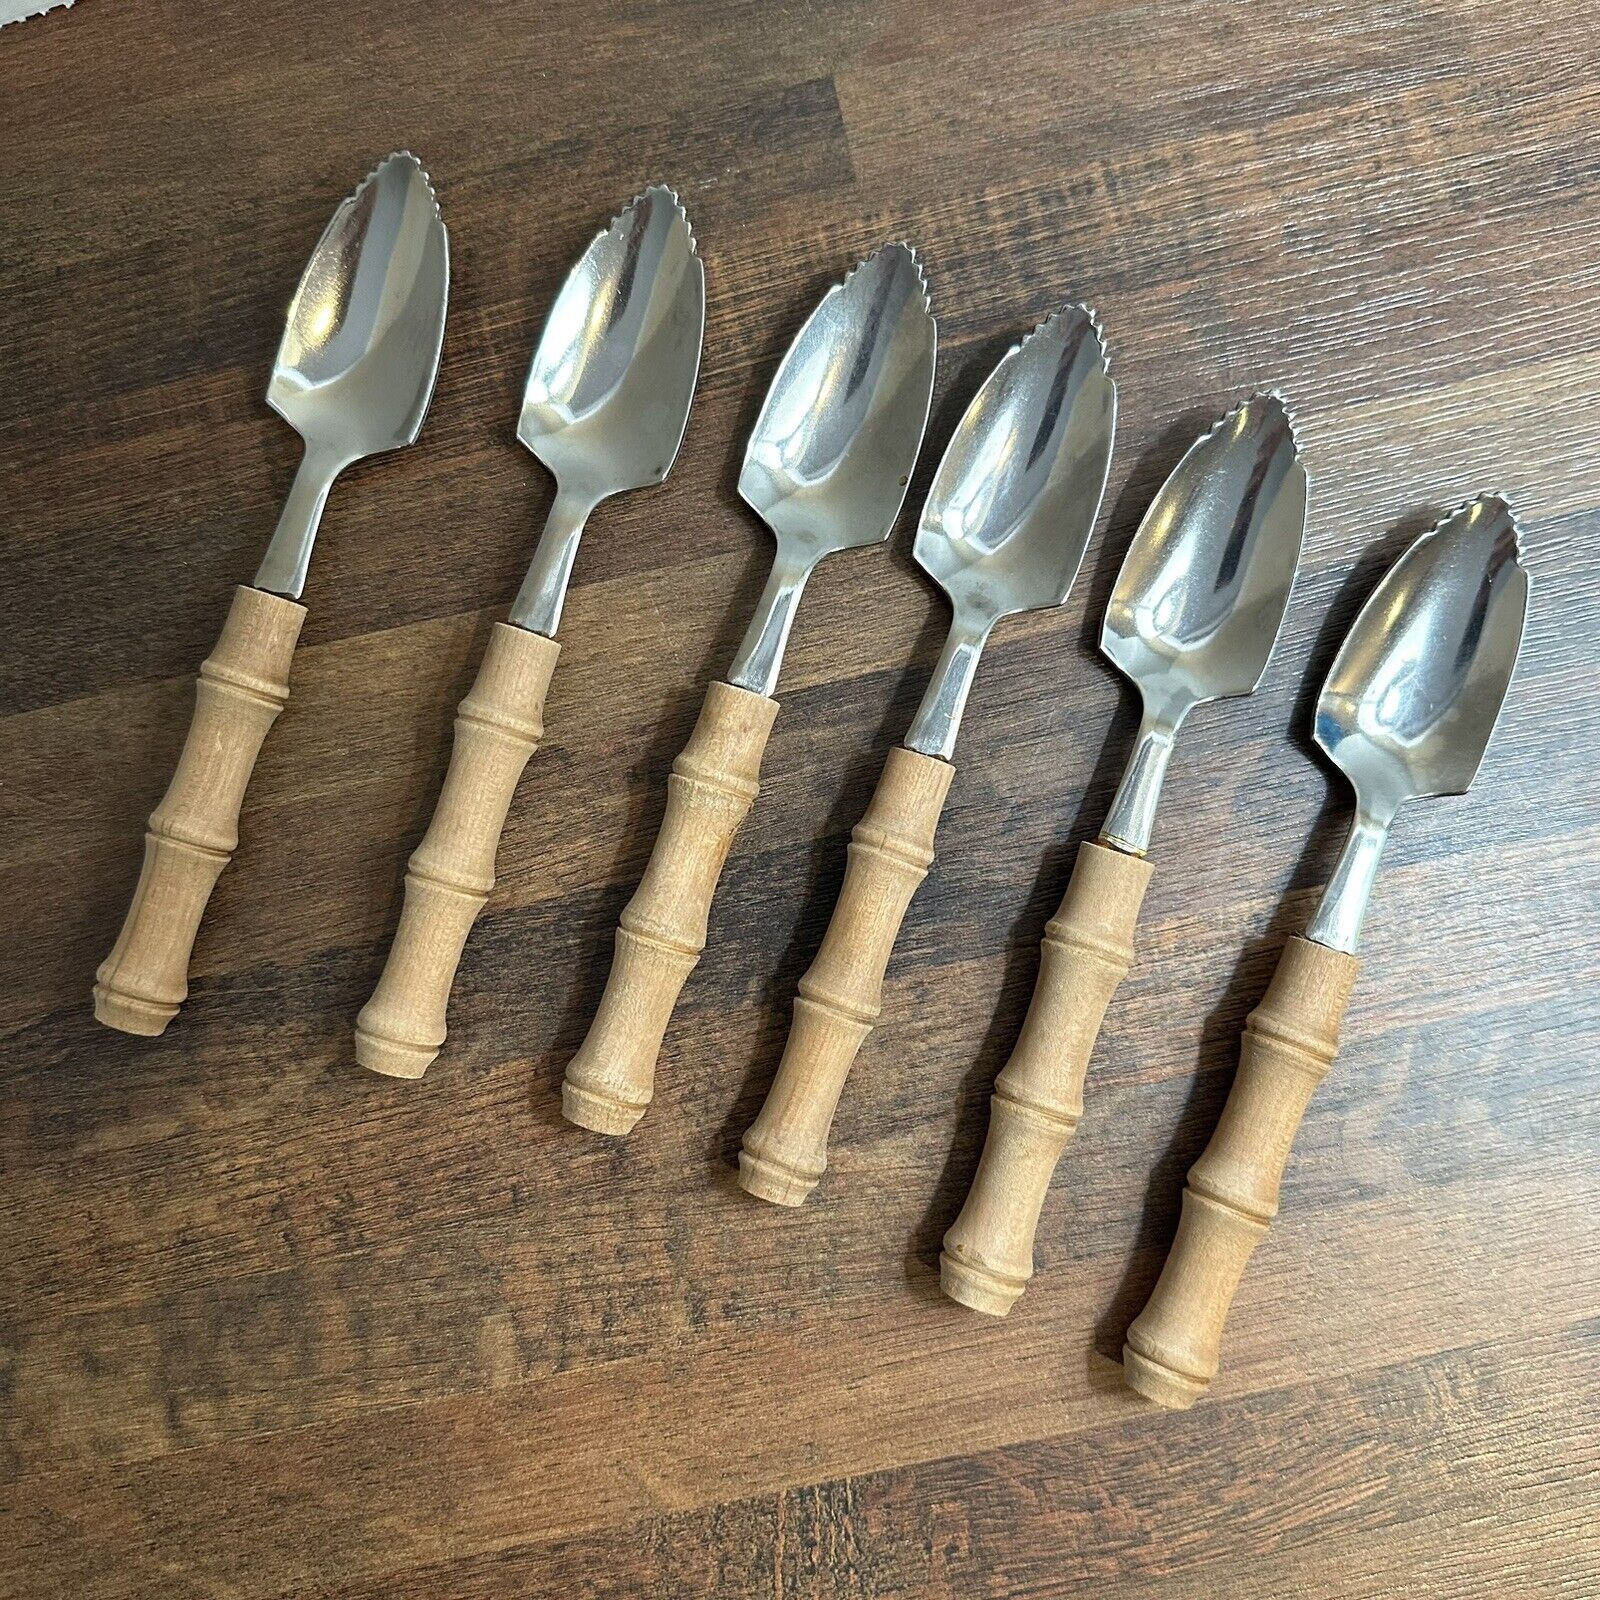 6 Vintage Serrated Bamboo Handle Grapefruit Fruit Spoons Stainless Made in Japan